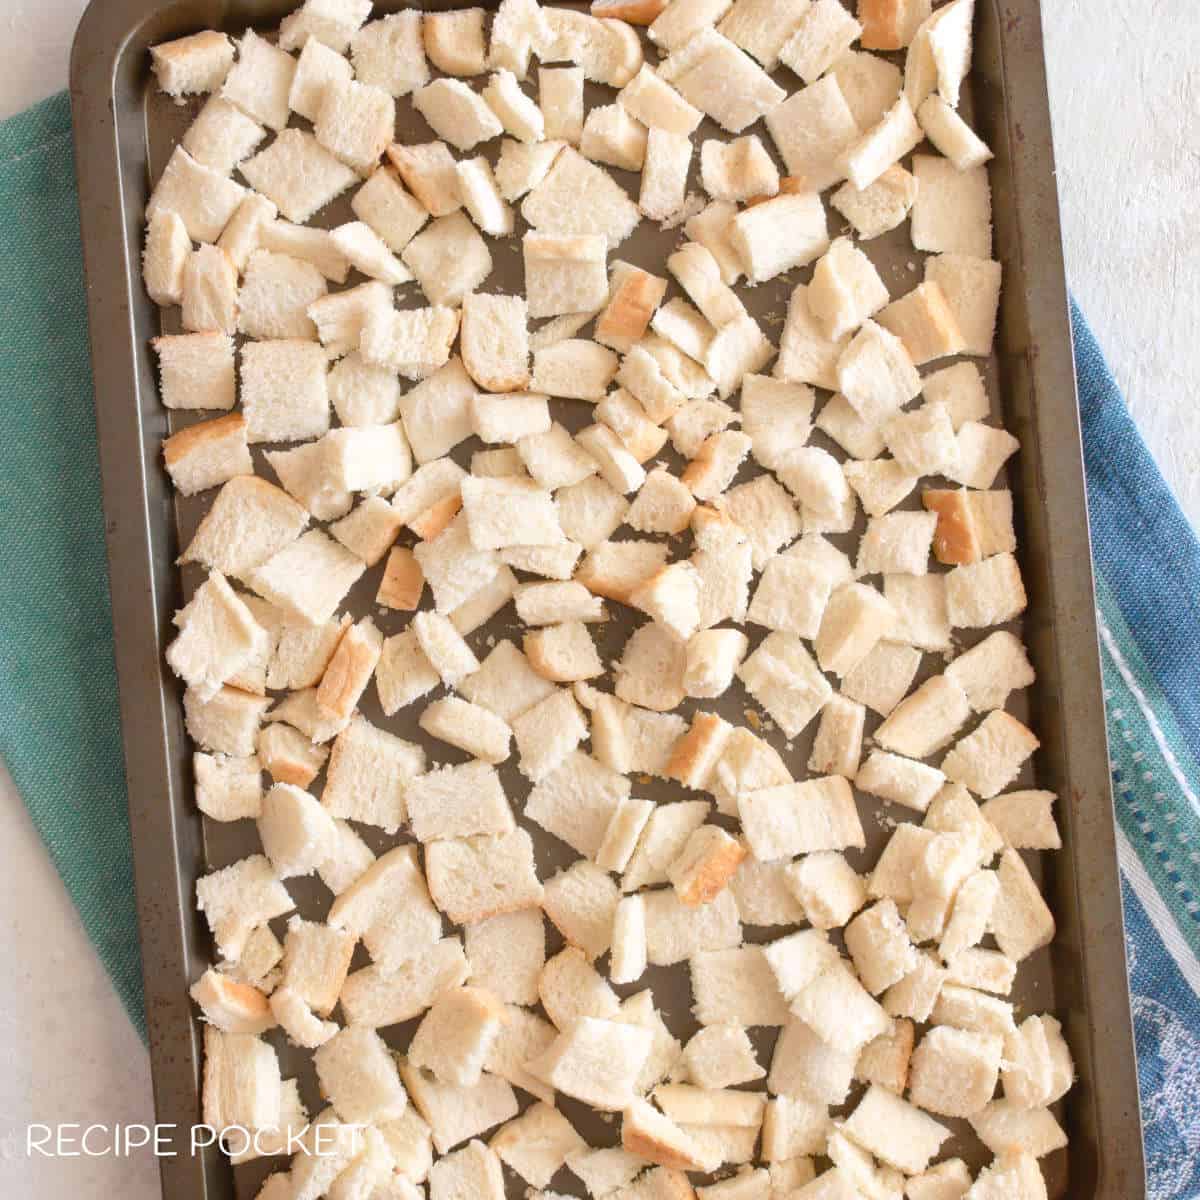 Bread cut into small cubes on a baking tray.